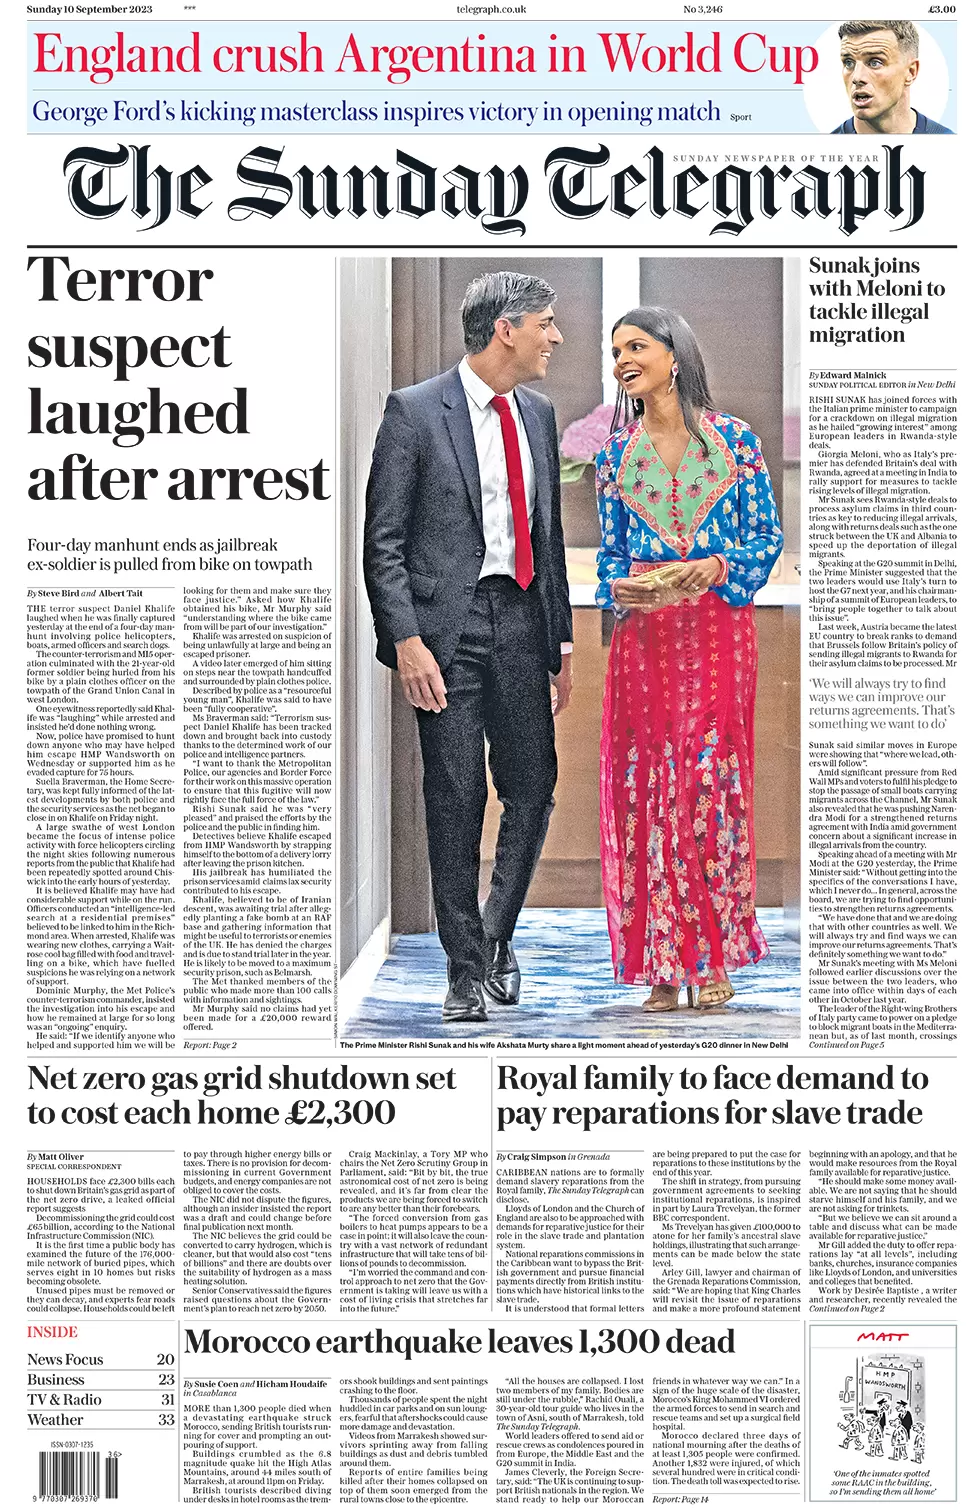 The Sunday Telegraph - Terror suspect laughed after arrest